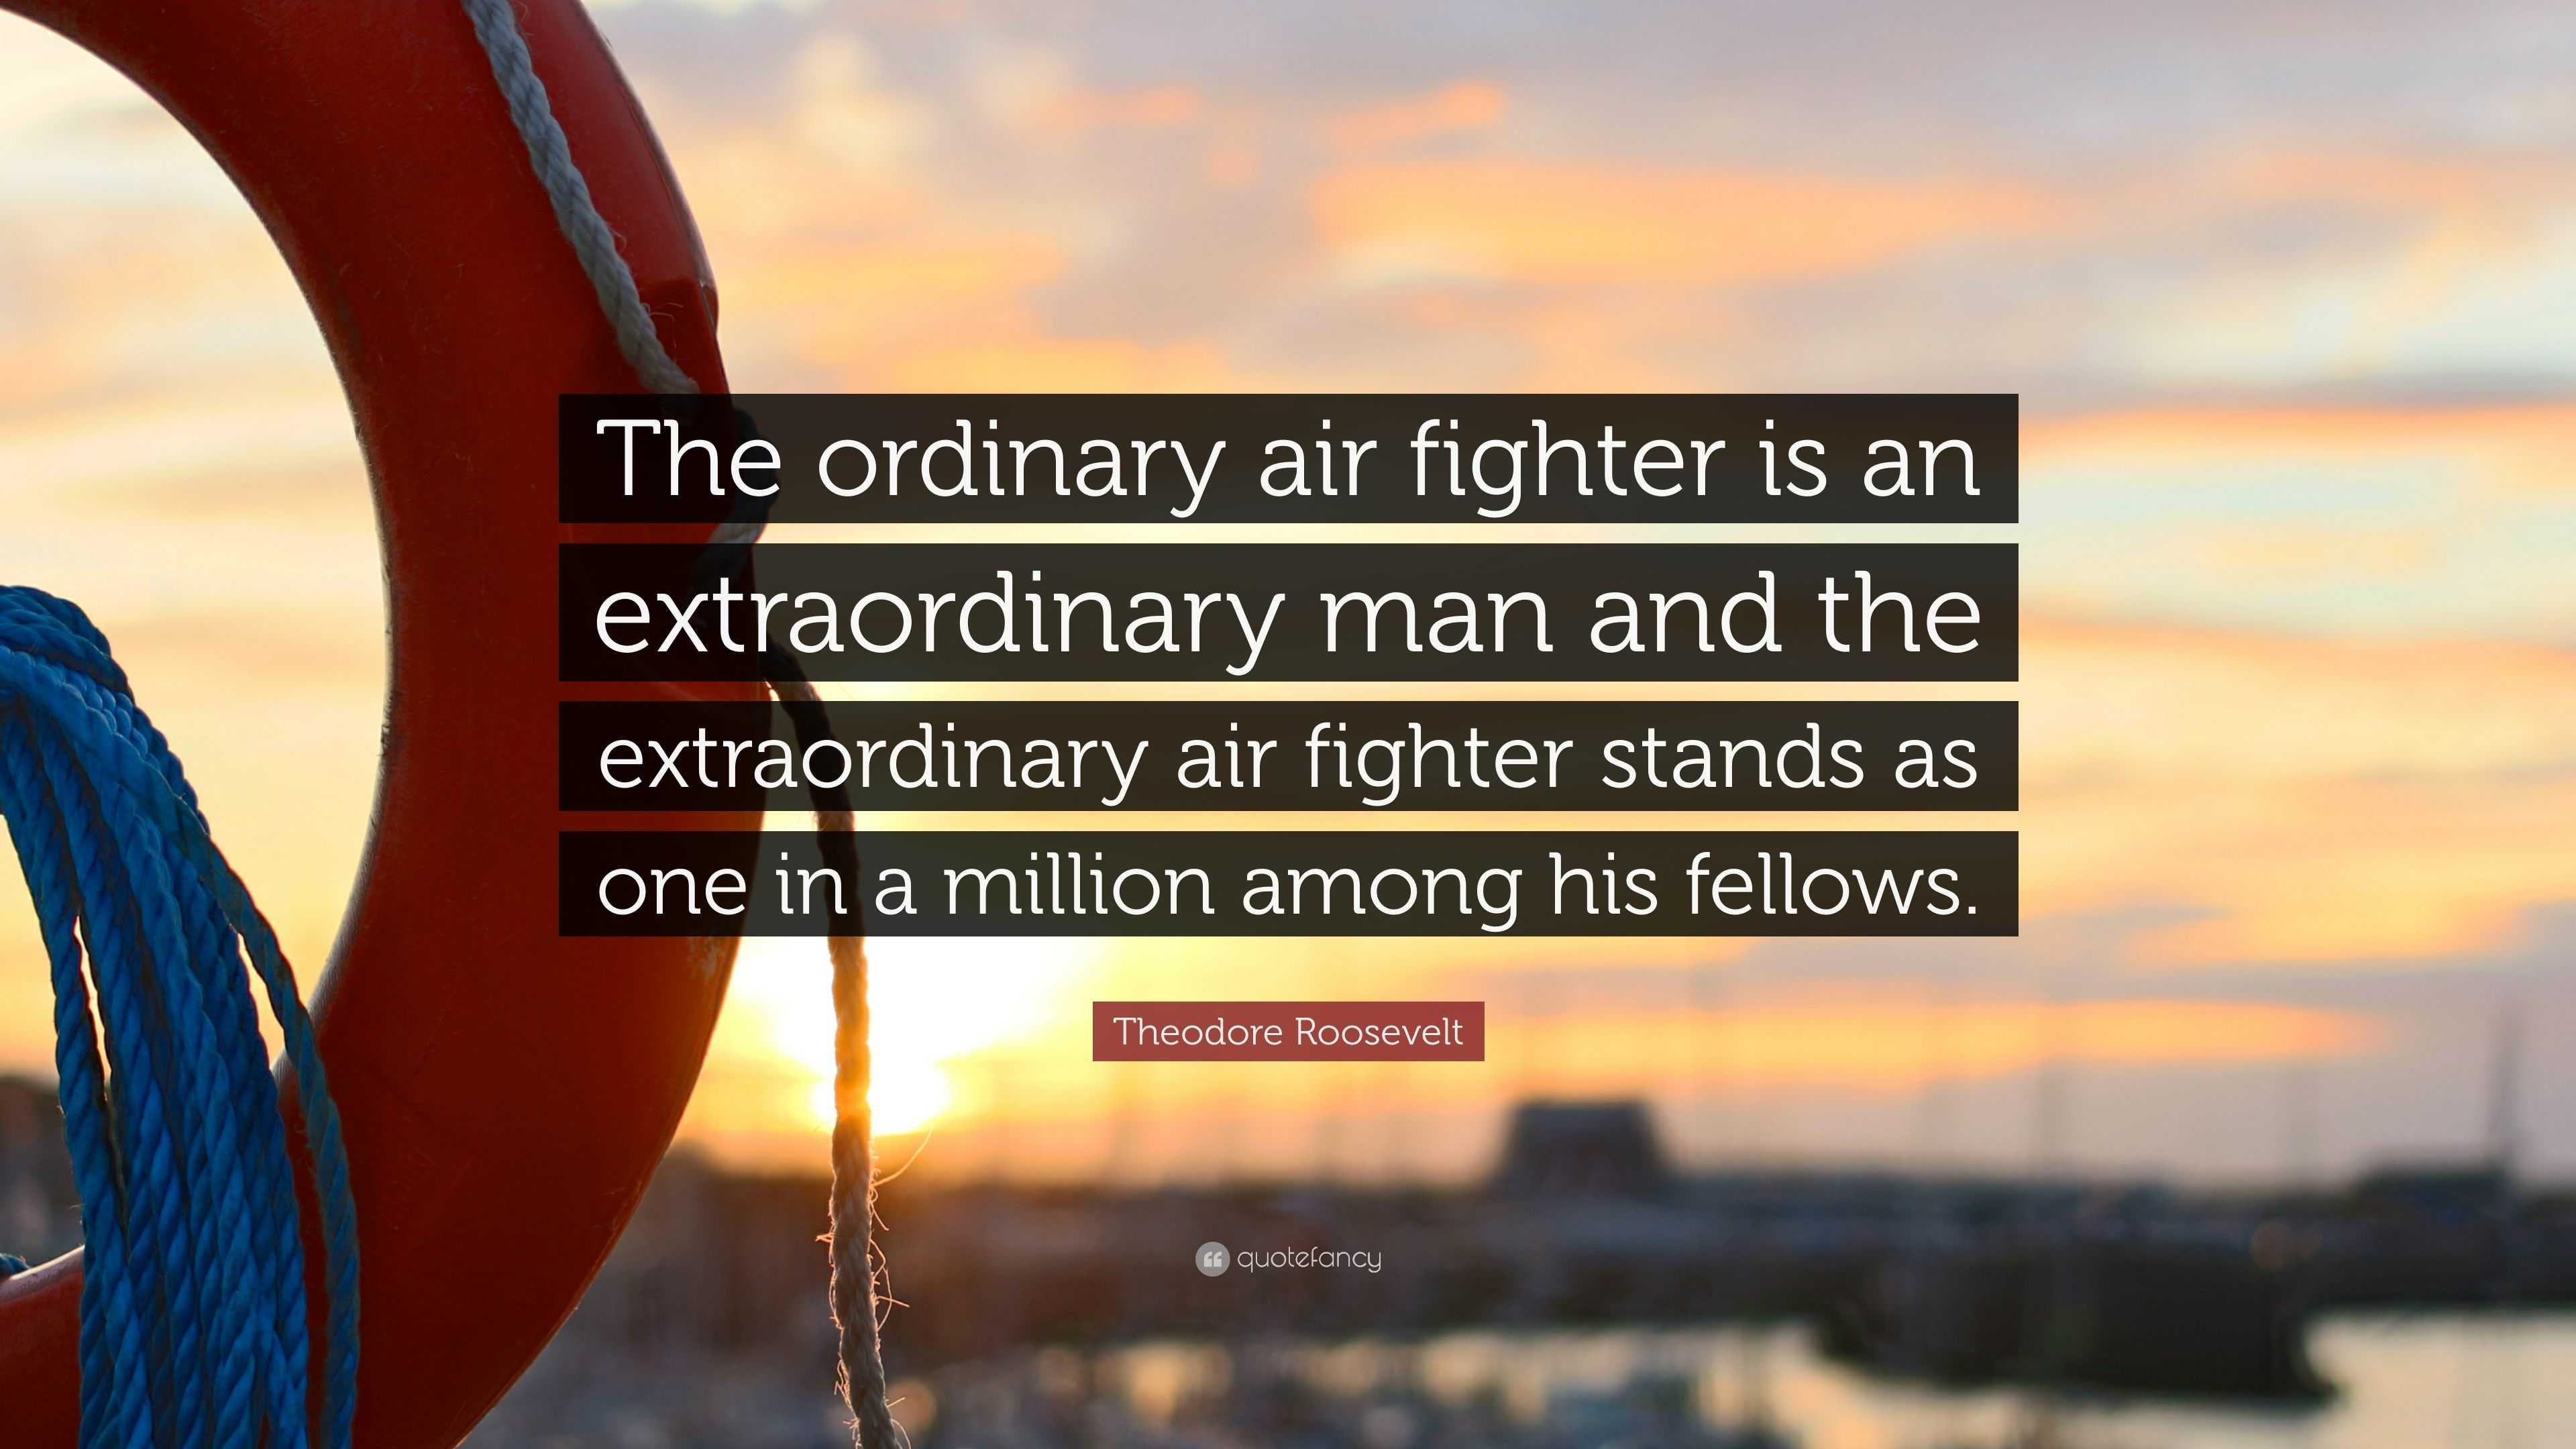 Theodore Roosevelt Quote “The ordinary air fighter is an extraordinary man and the extraordinary